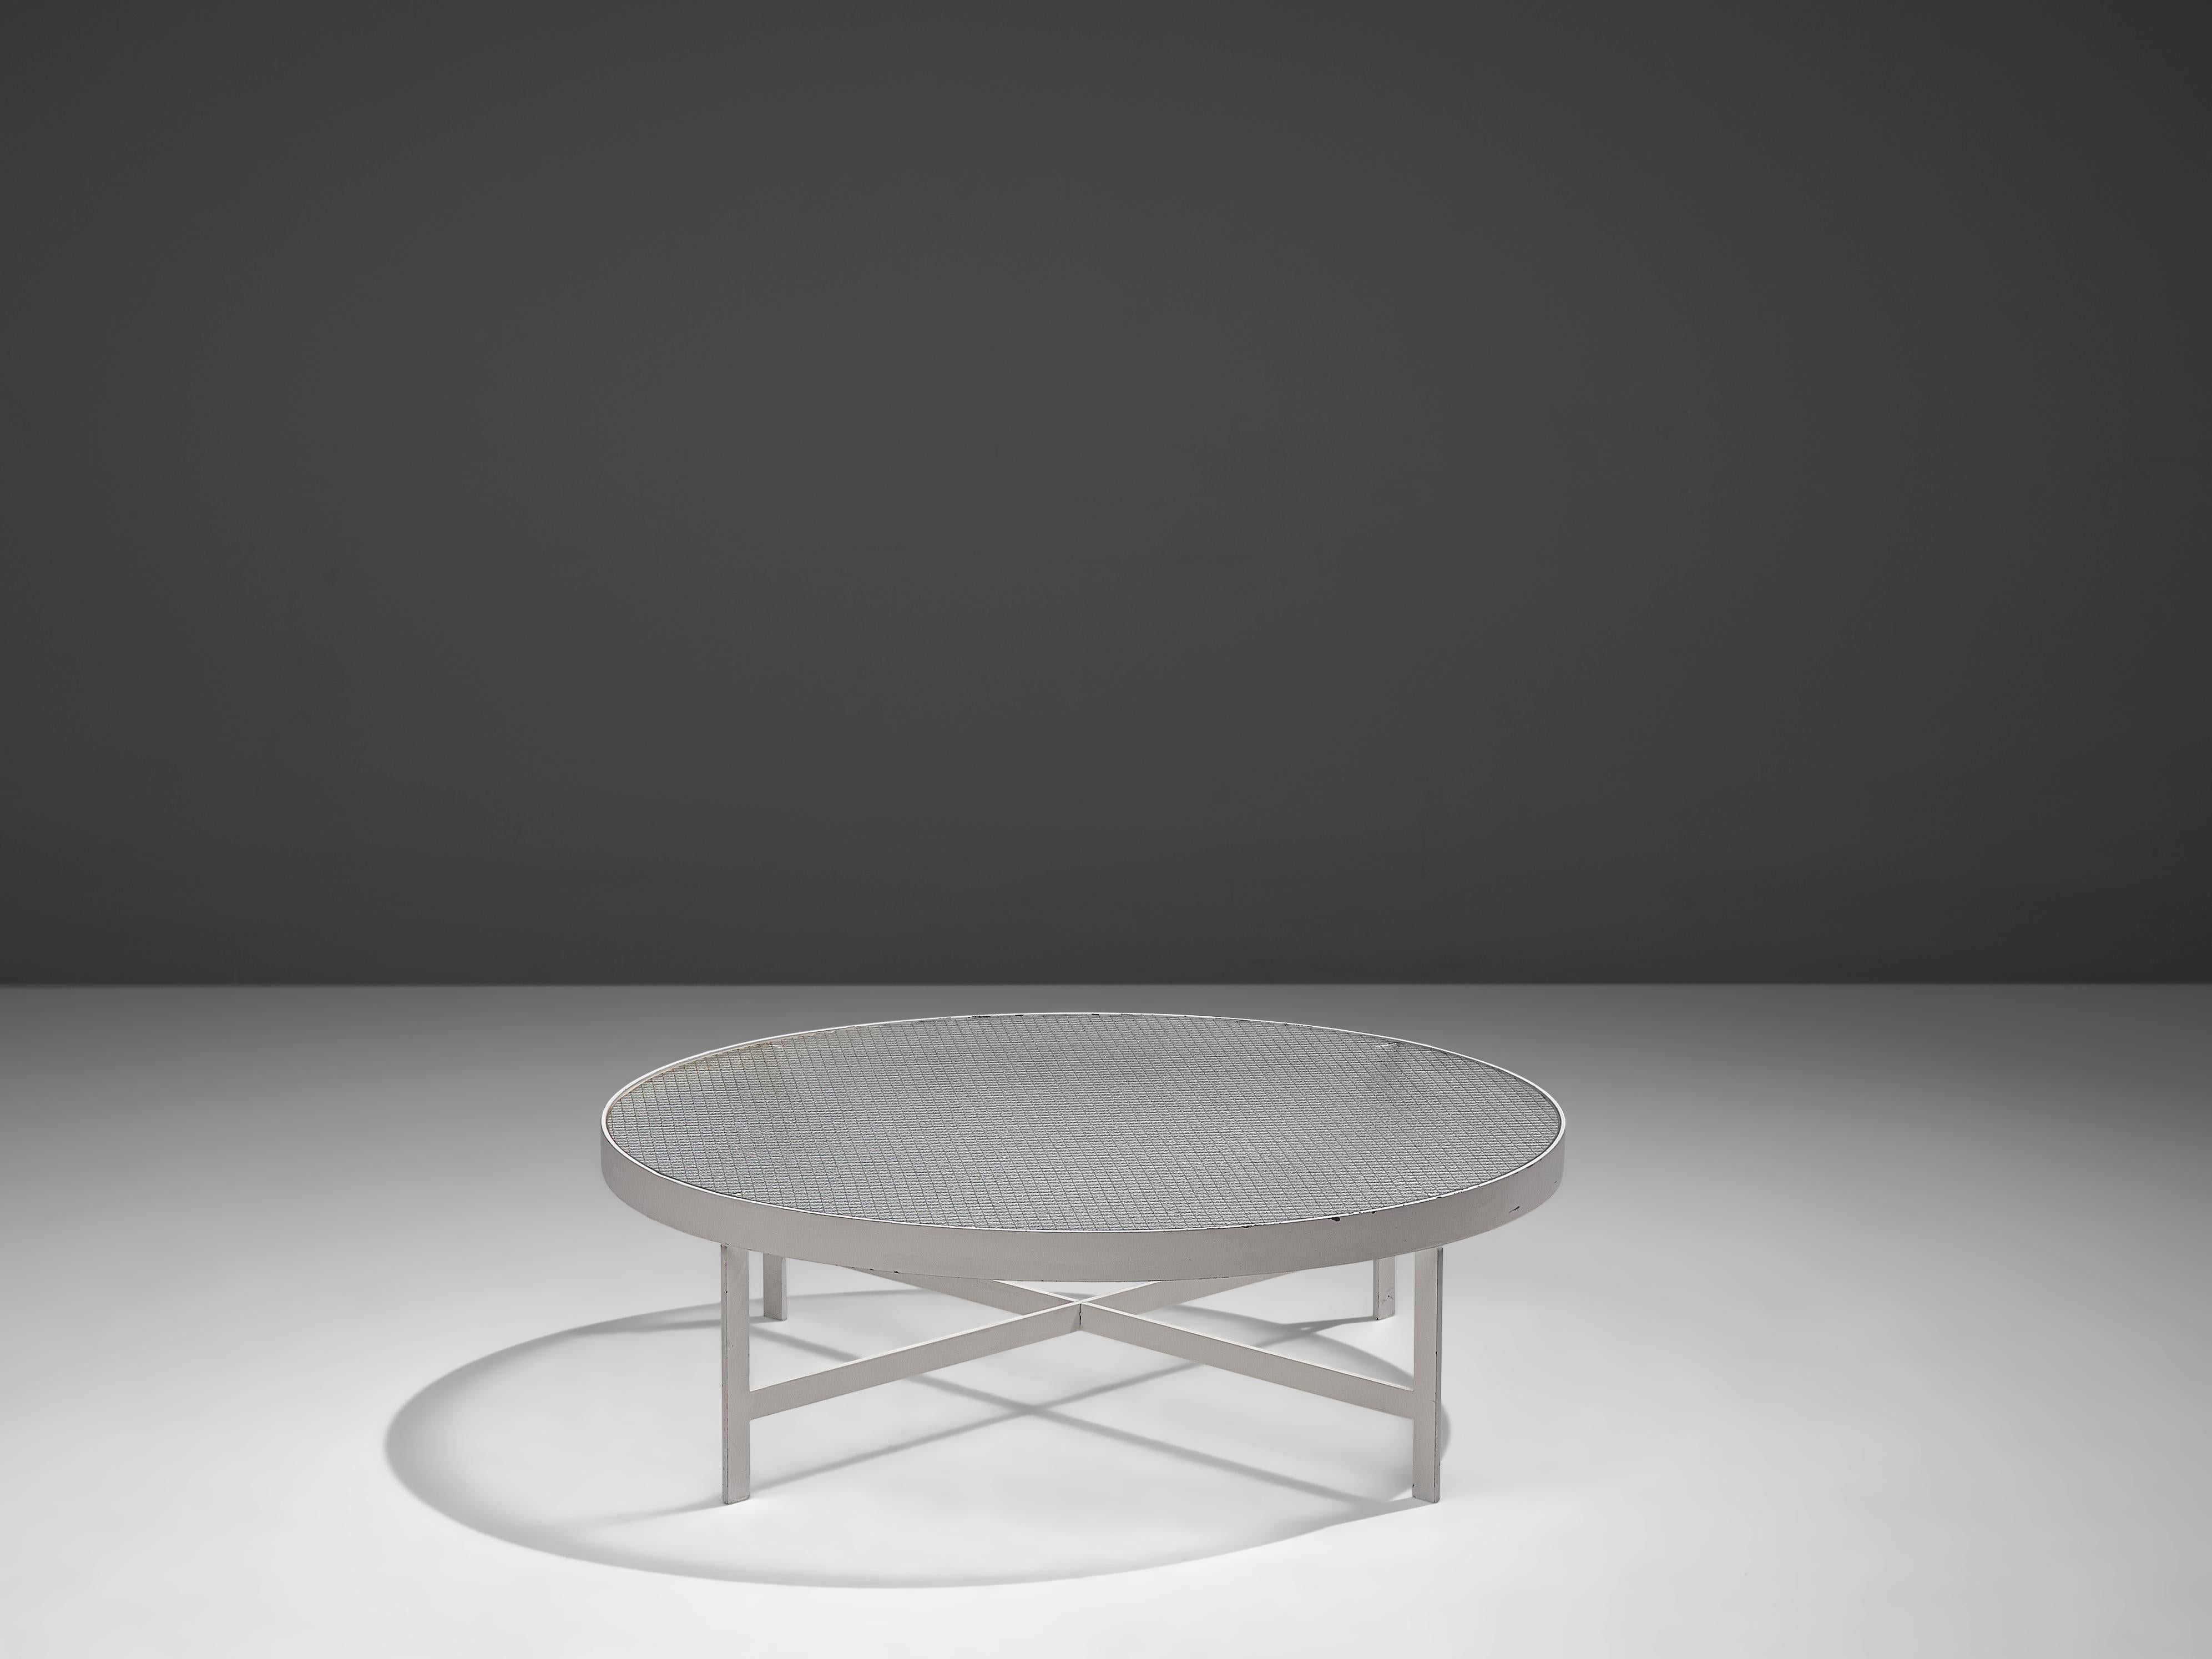 Janni Van Pelt, coffee table, glass, white metal, The Netherlands, circa 1958

Round coffee table in white coated metal and wired glass. This table is a variation of Janni Van Pelt's model M419. The base consists of four flat legs with a